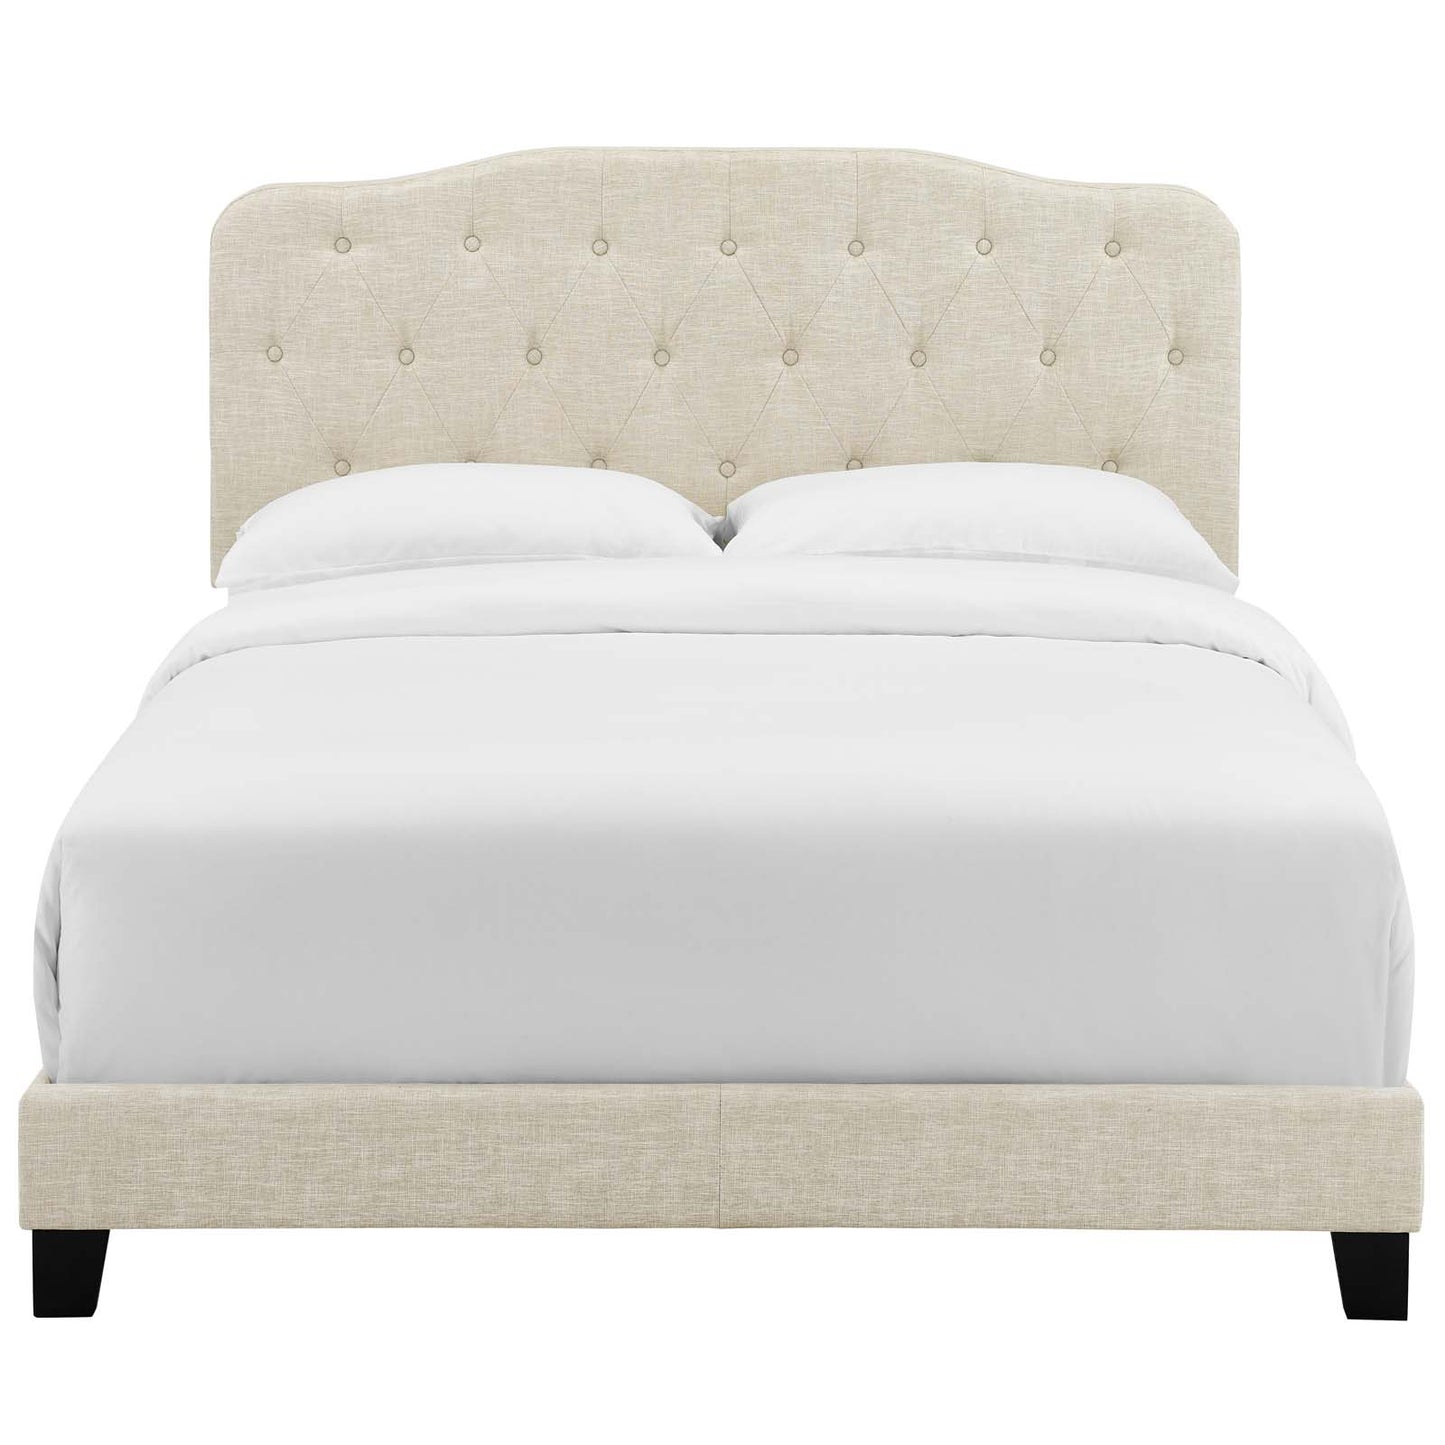 Amelia King Upholstered Fabric Bed Beige MOD-5841-BEI